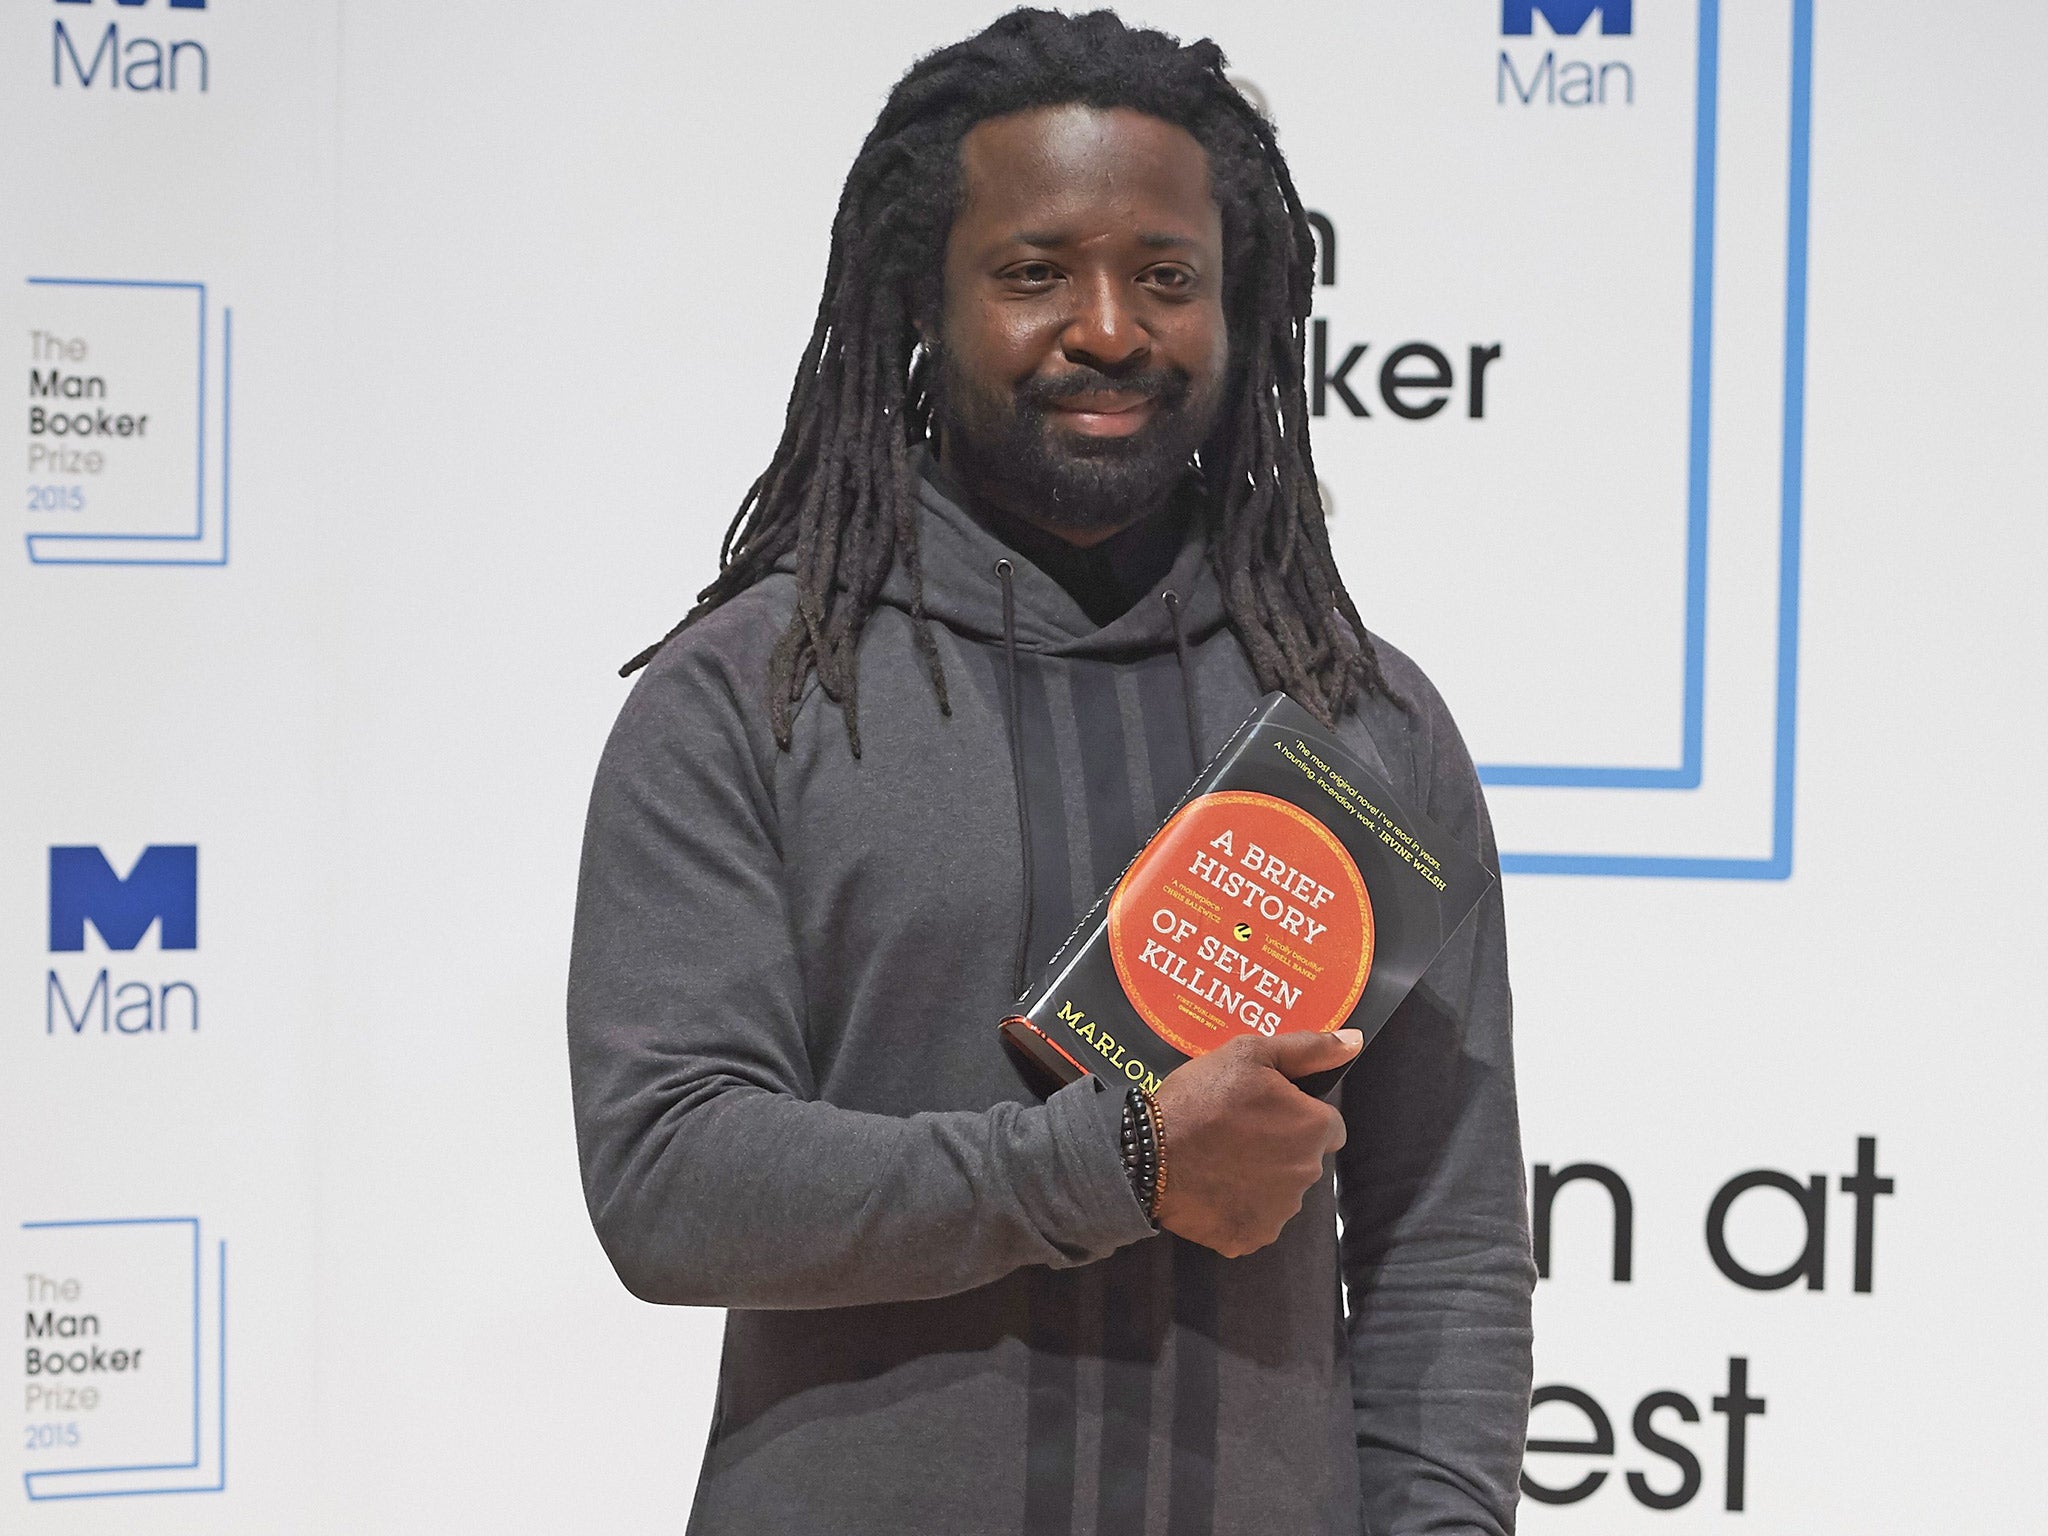 Marlon James has become the first Jamaican to win the Man Booker Prize